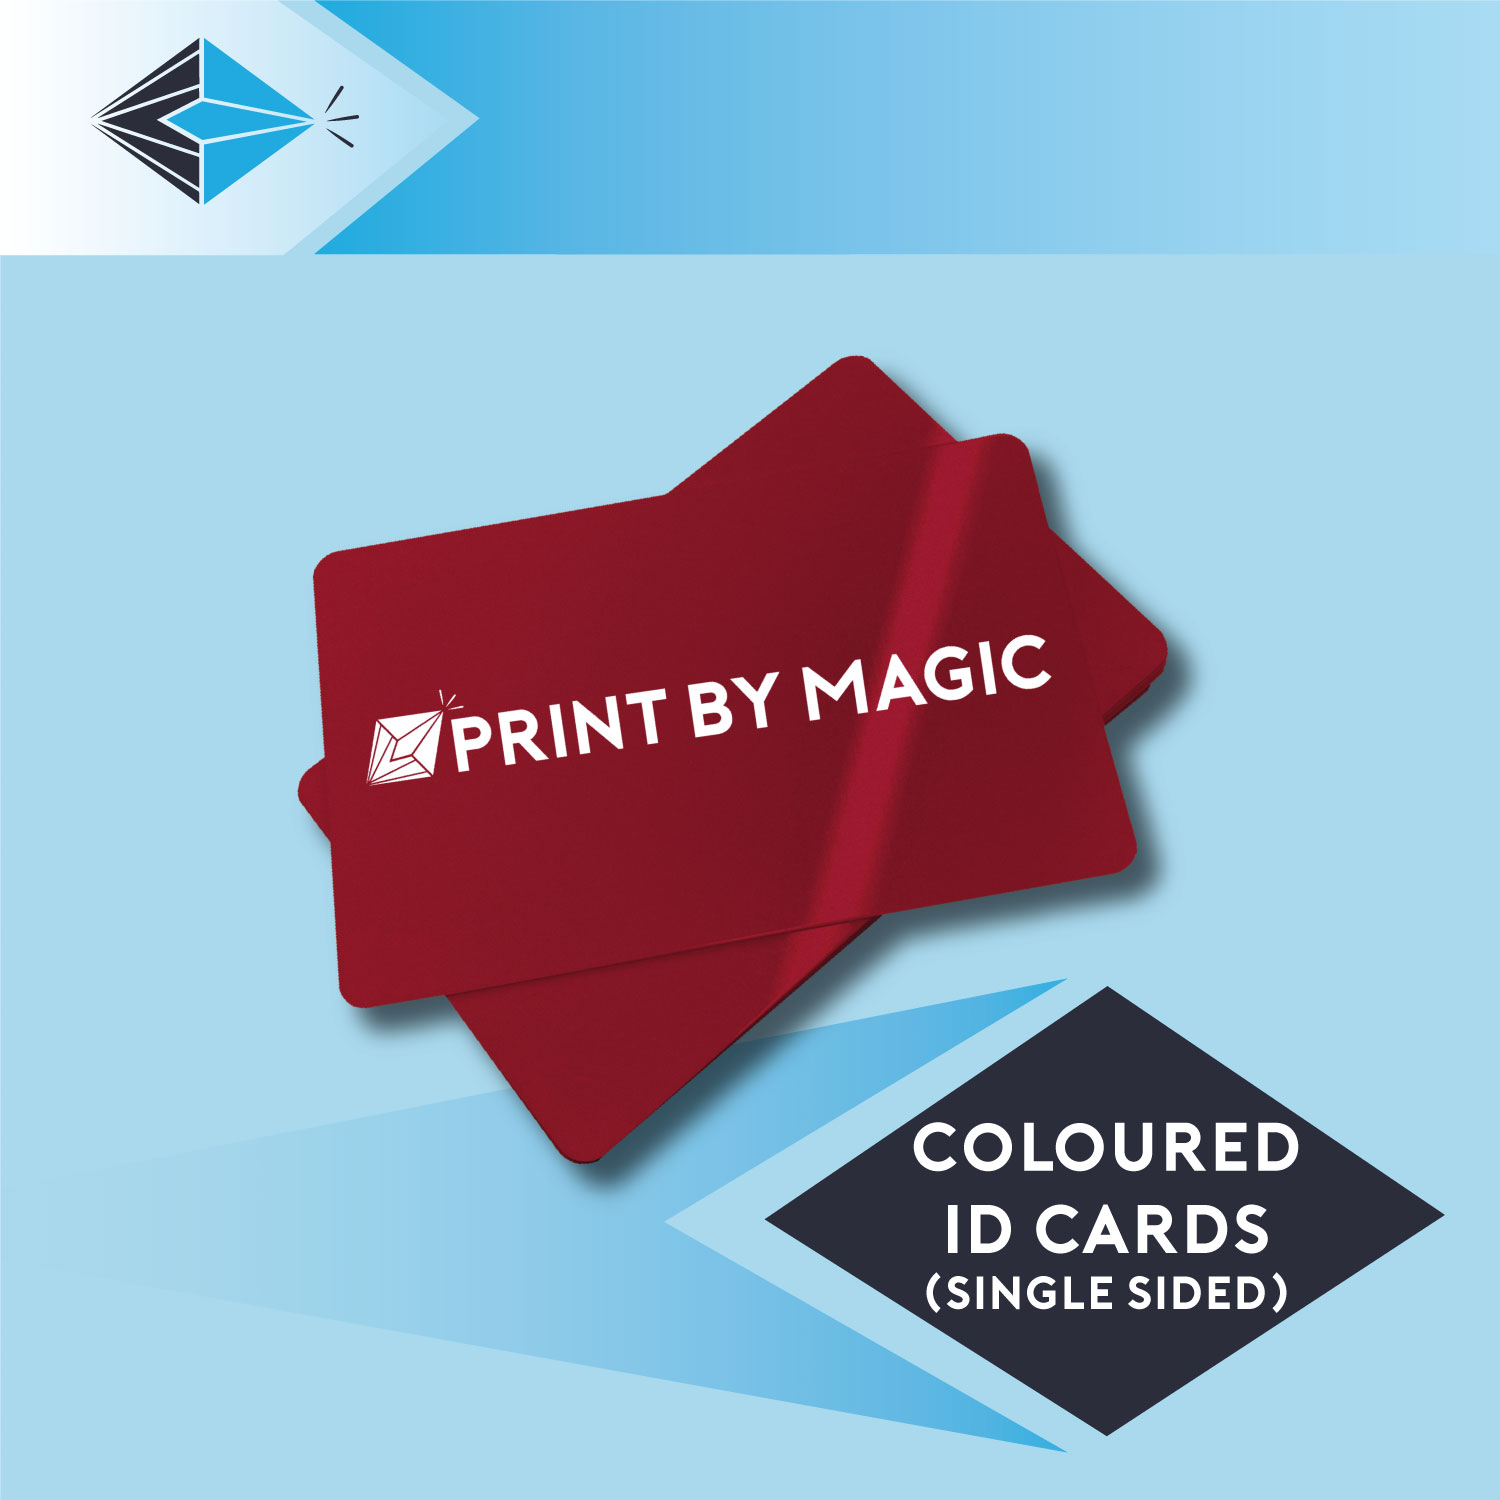 Coloured ID card printing identification cards on red plastic stockport manchester uk